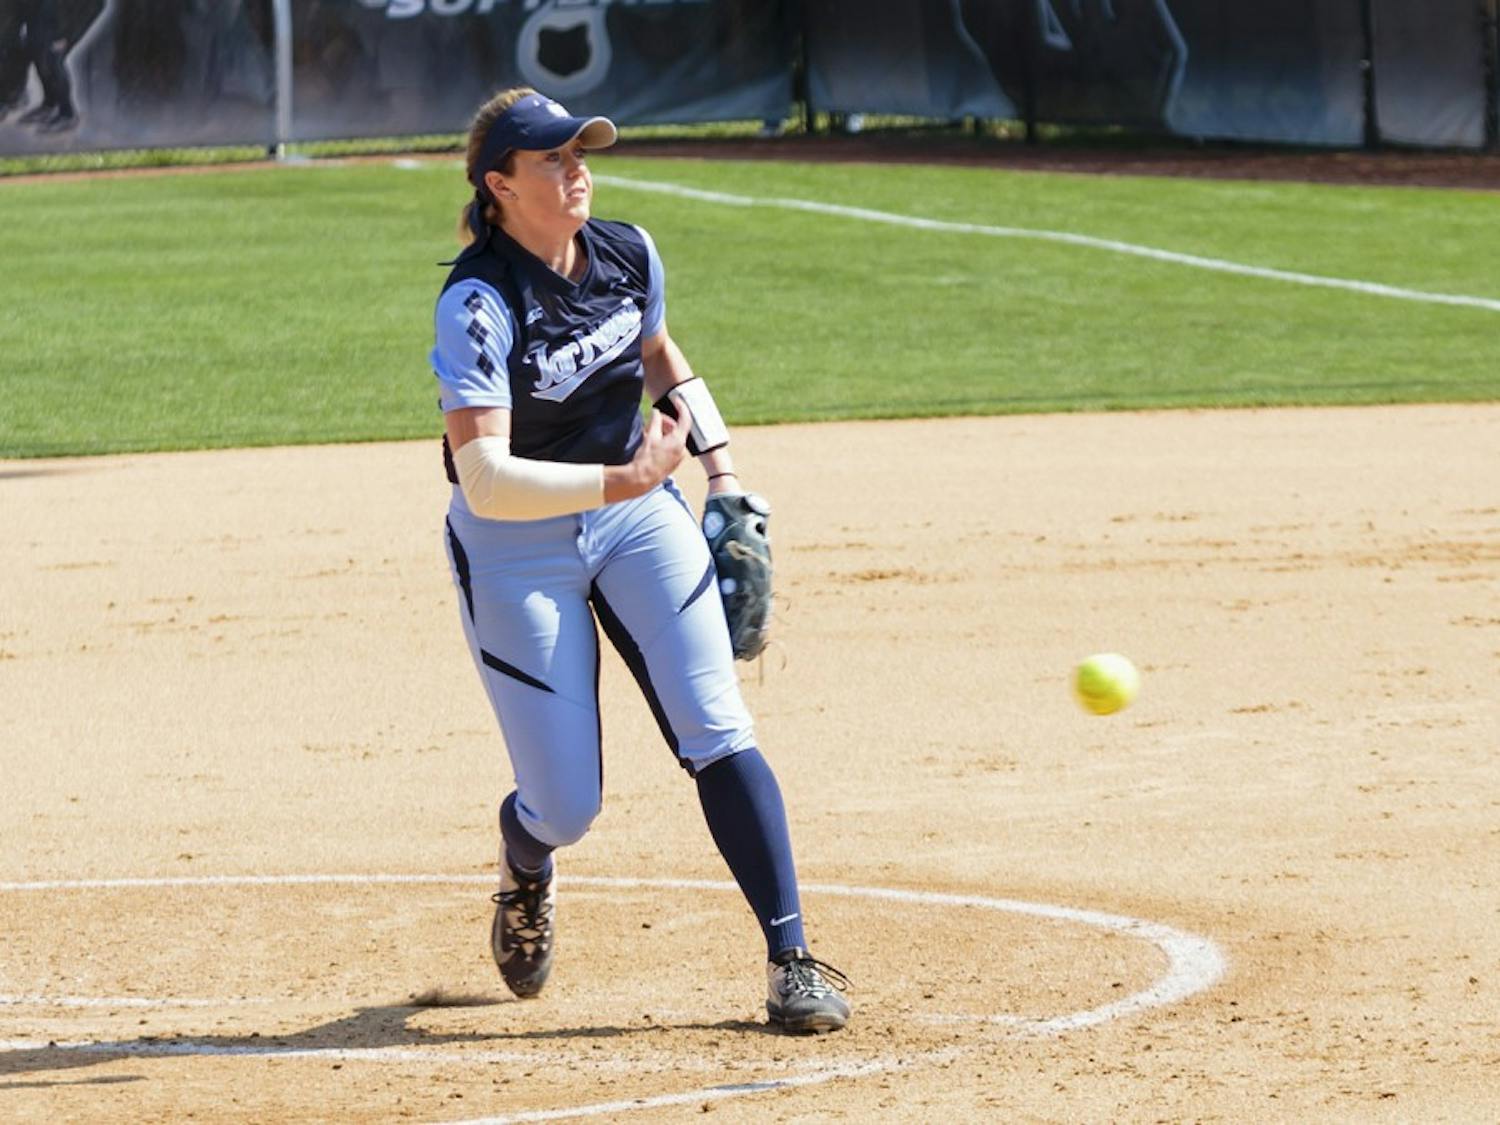 North Carolina pitcher Kendra Lynch (15) throws a pitch in Saturday's game against&nbsp;Pittsburgh.